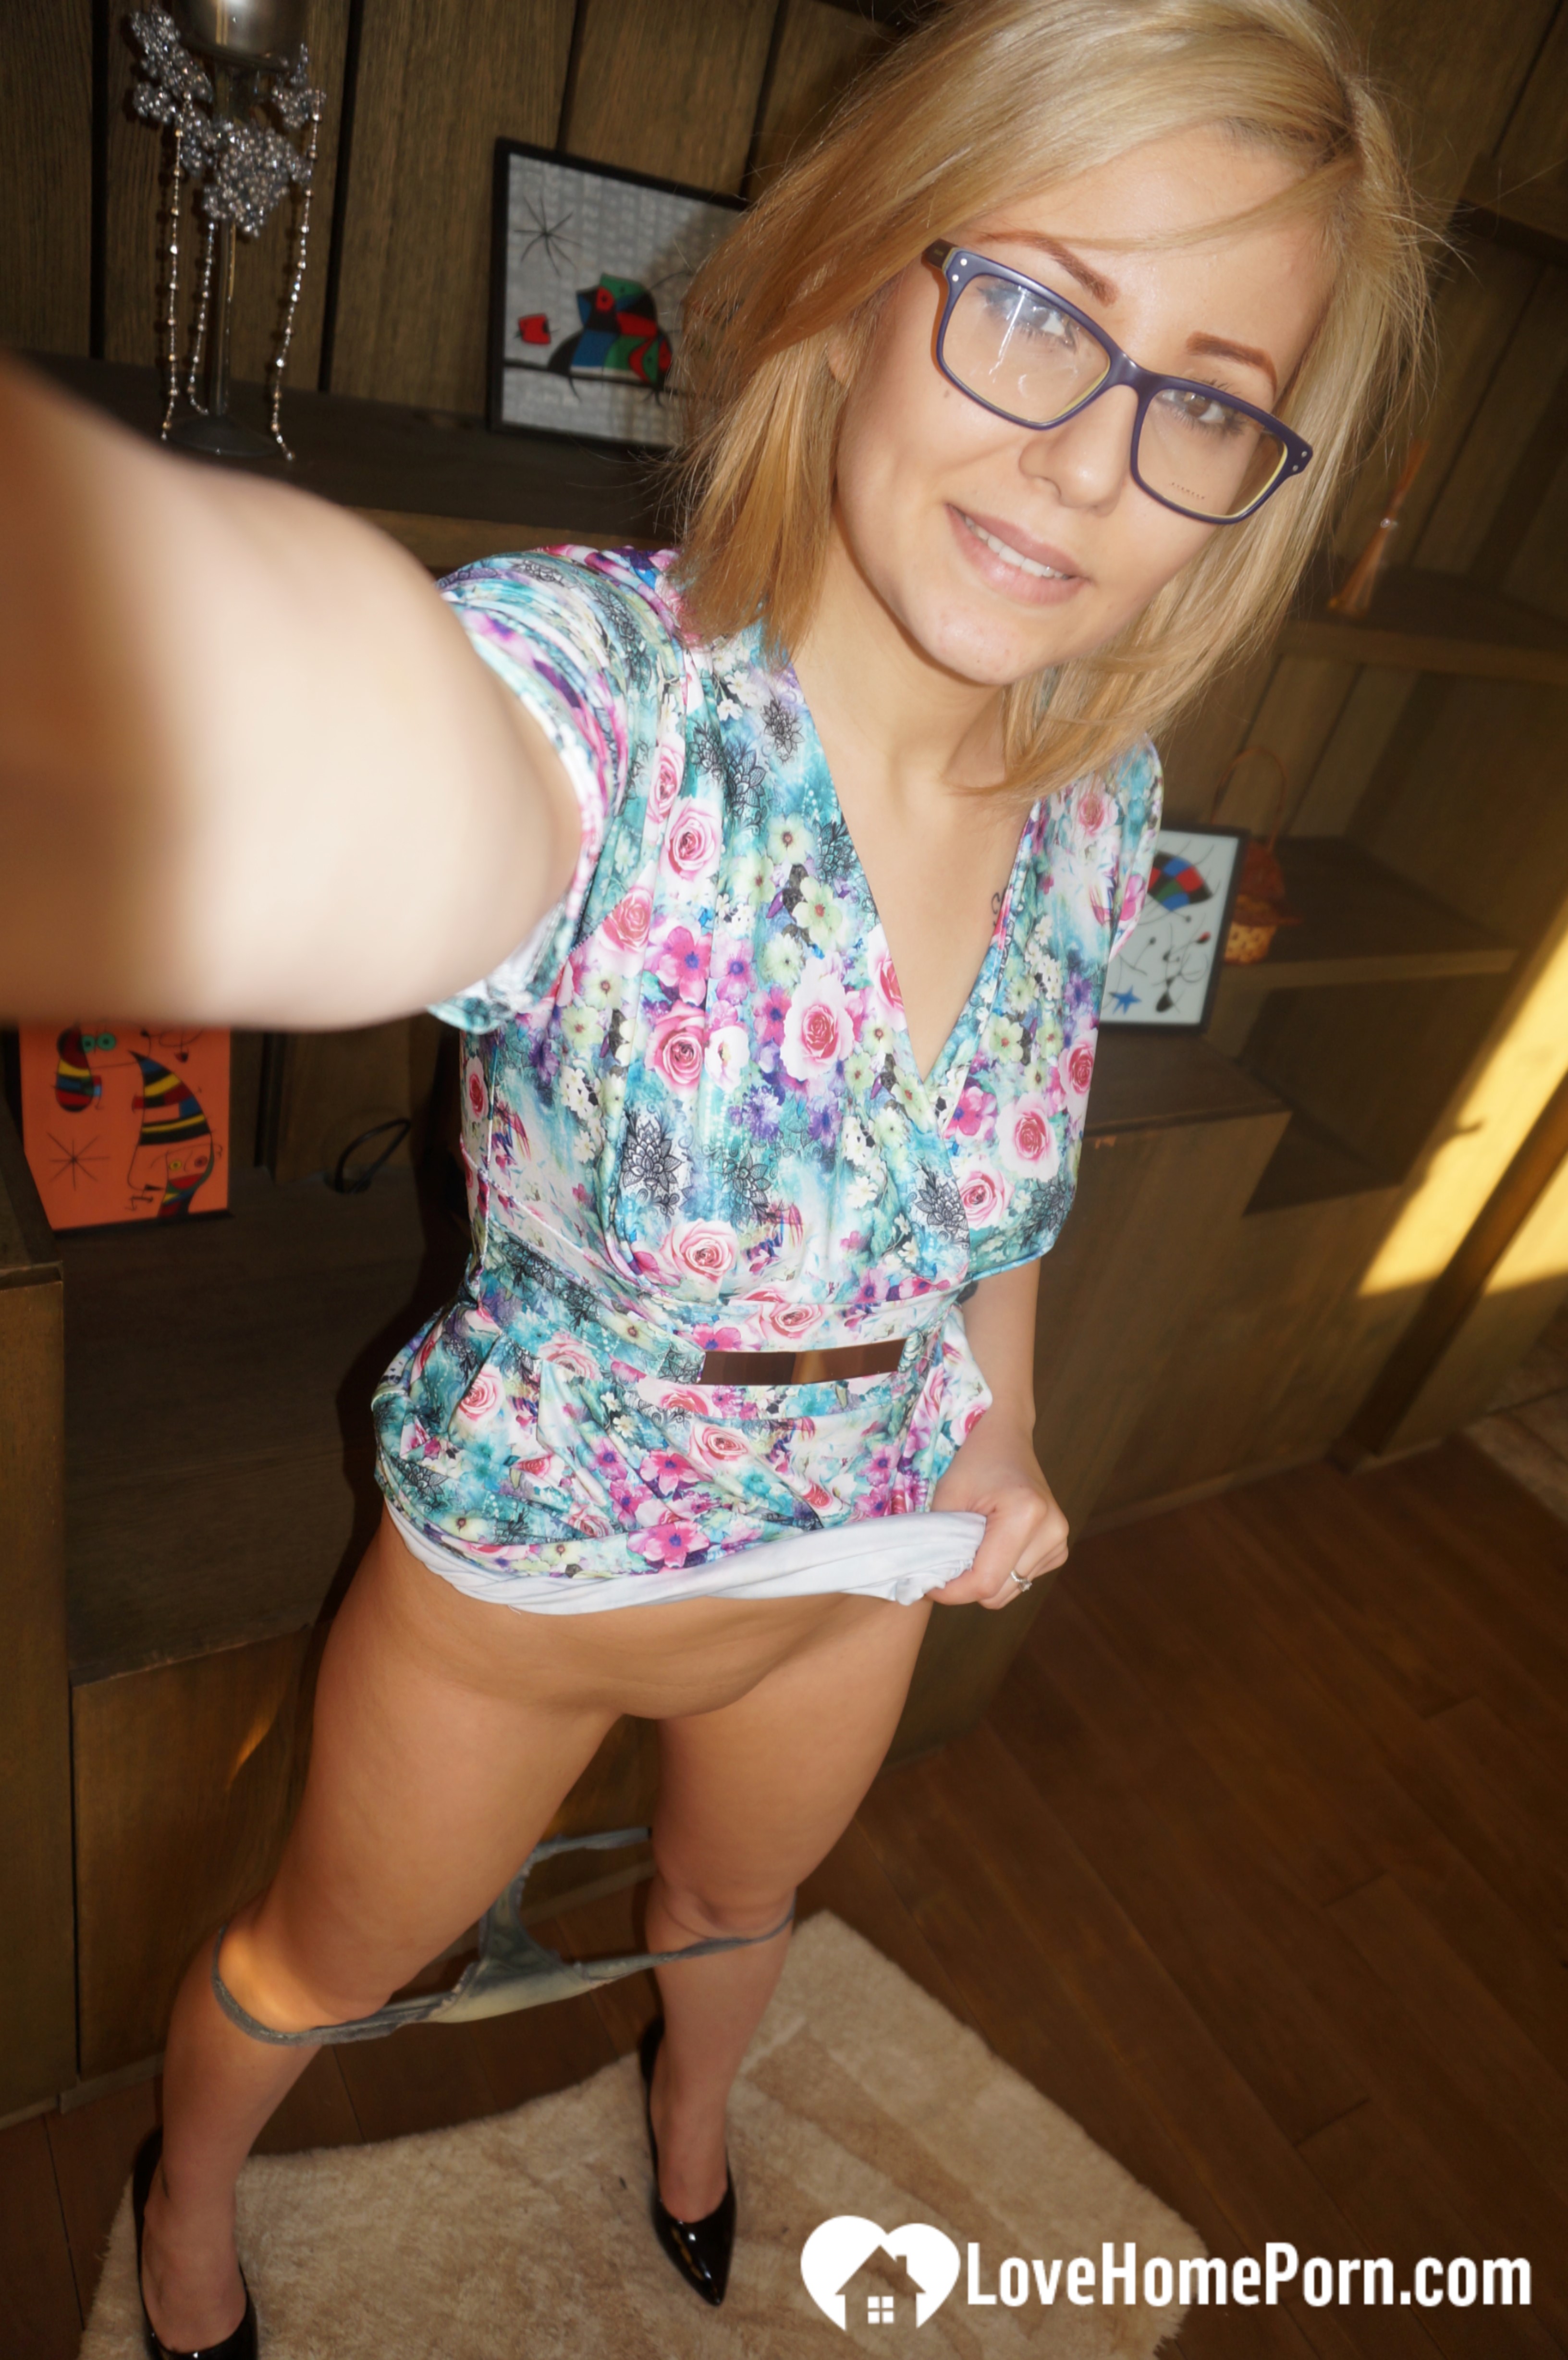 Amateur blonde with glasses exposes her naughty side